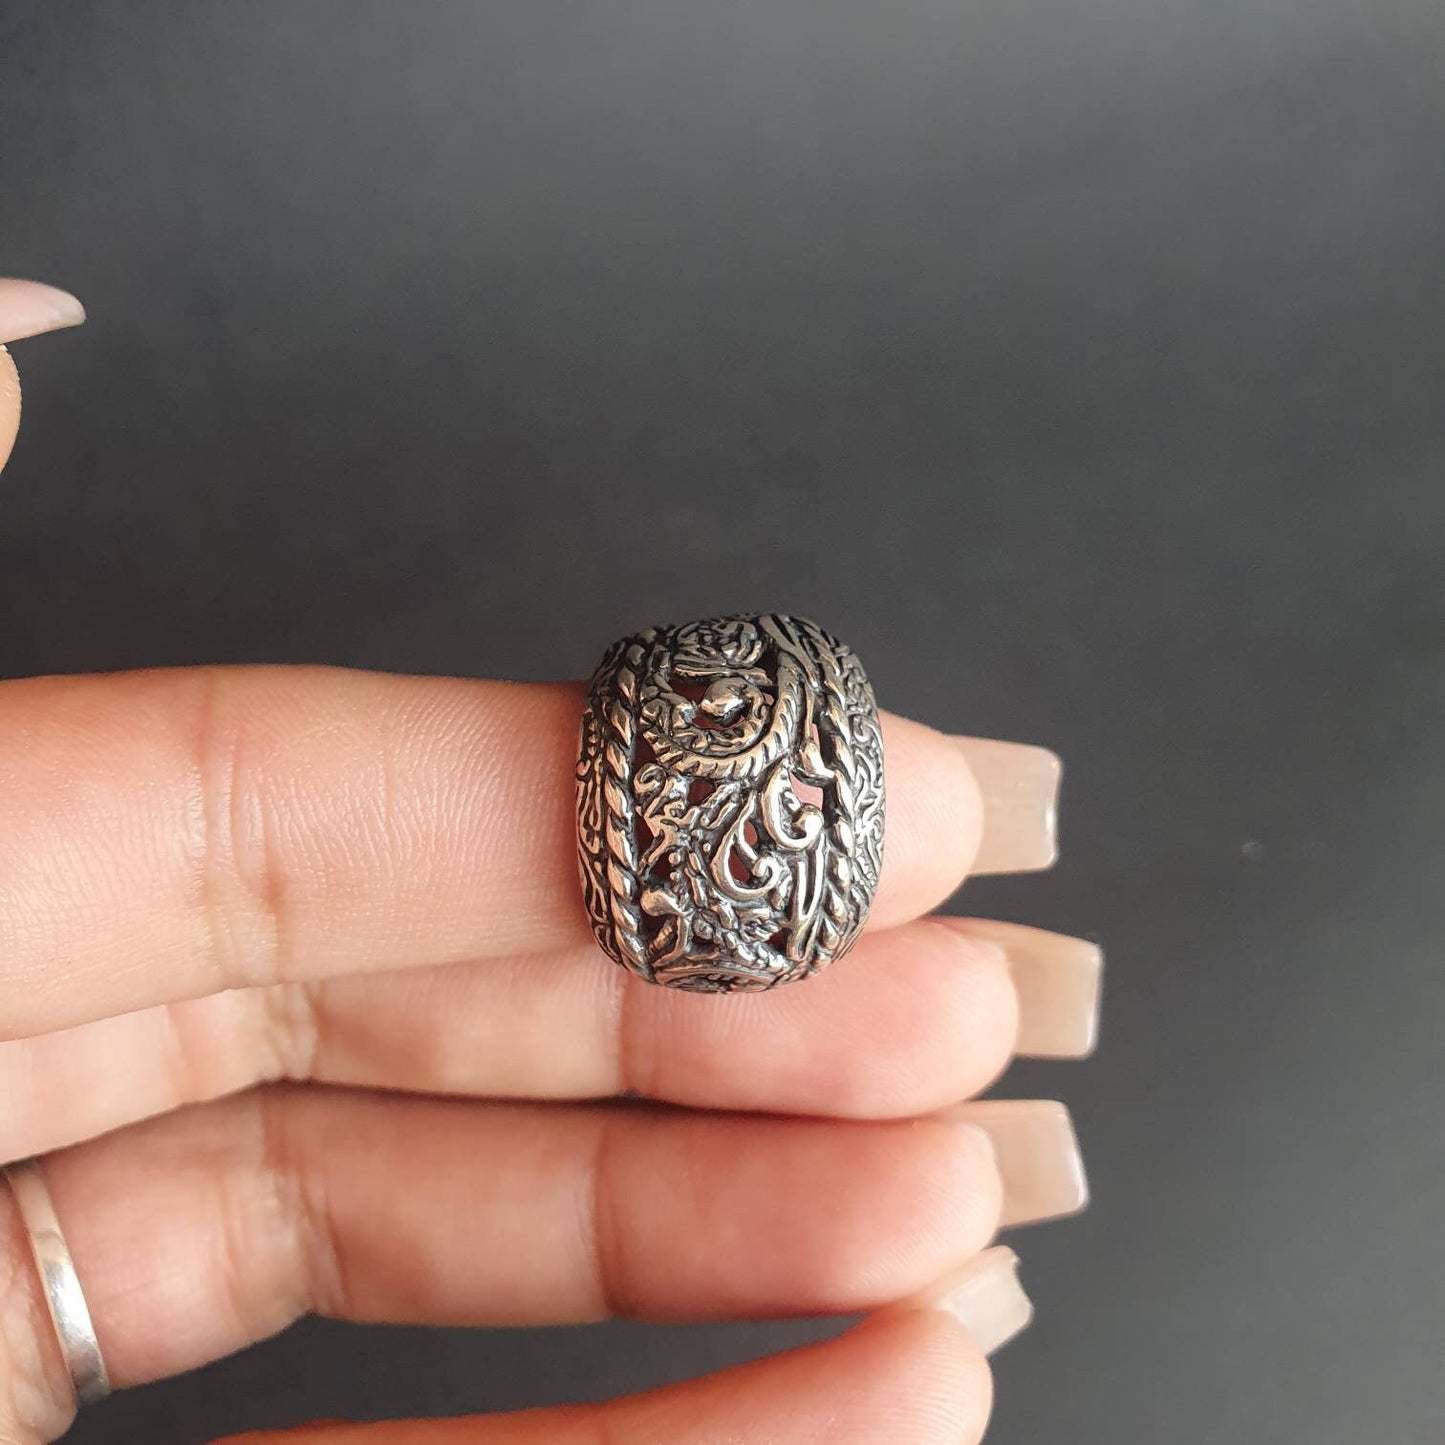 Statement ring,Chunky silver ring,Chunky statement ring ,Sterling ring,ornate design, vintage jewellery